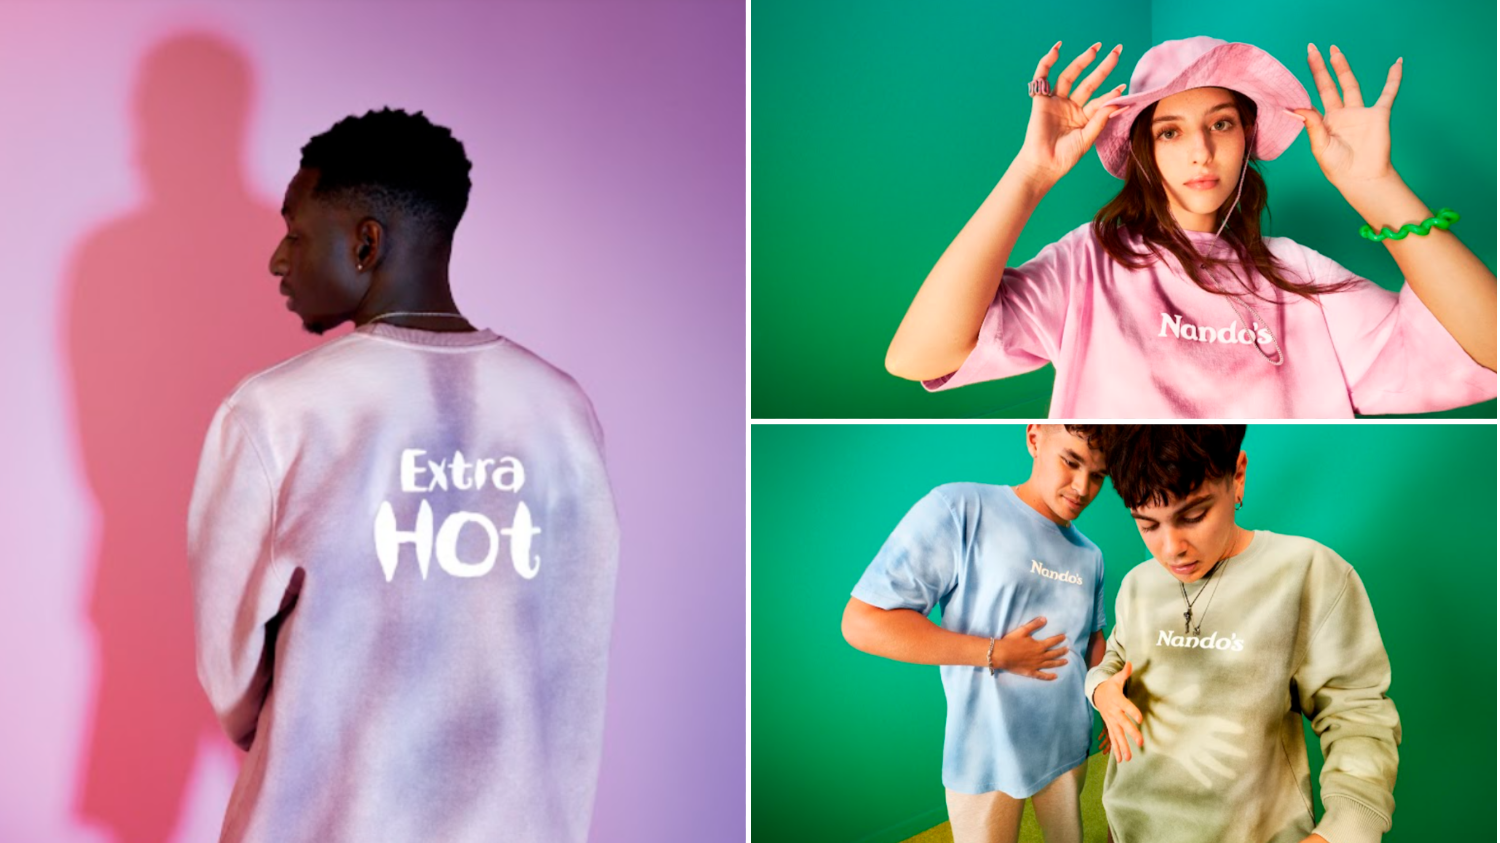 Nando’s announces a new clothing line based on heat levels – with lemon ...